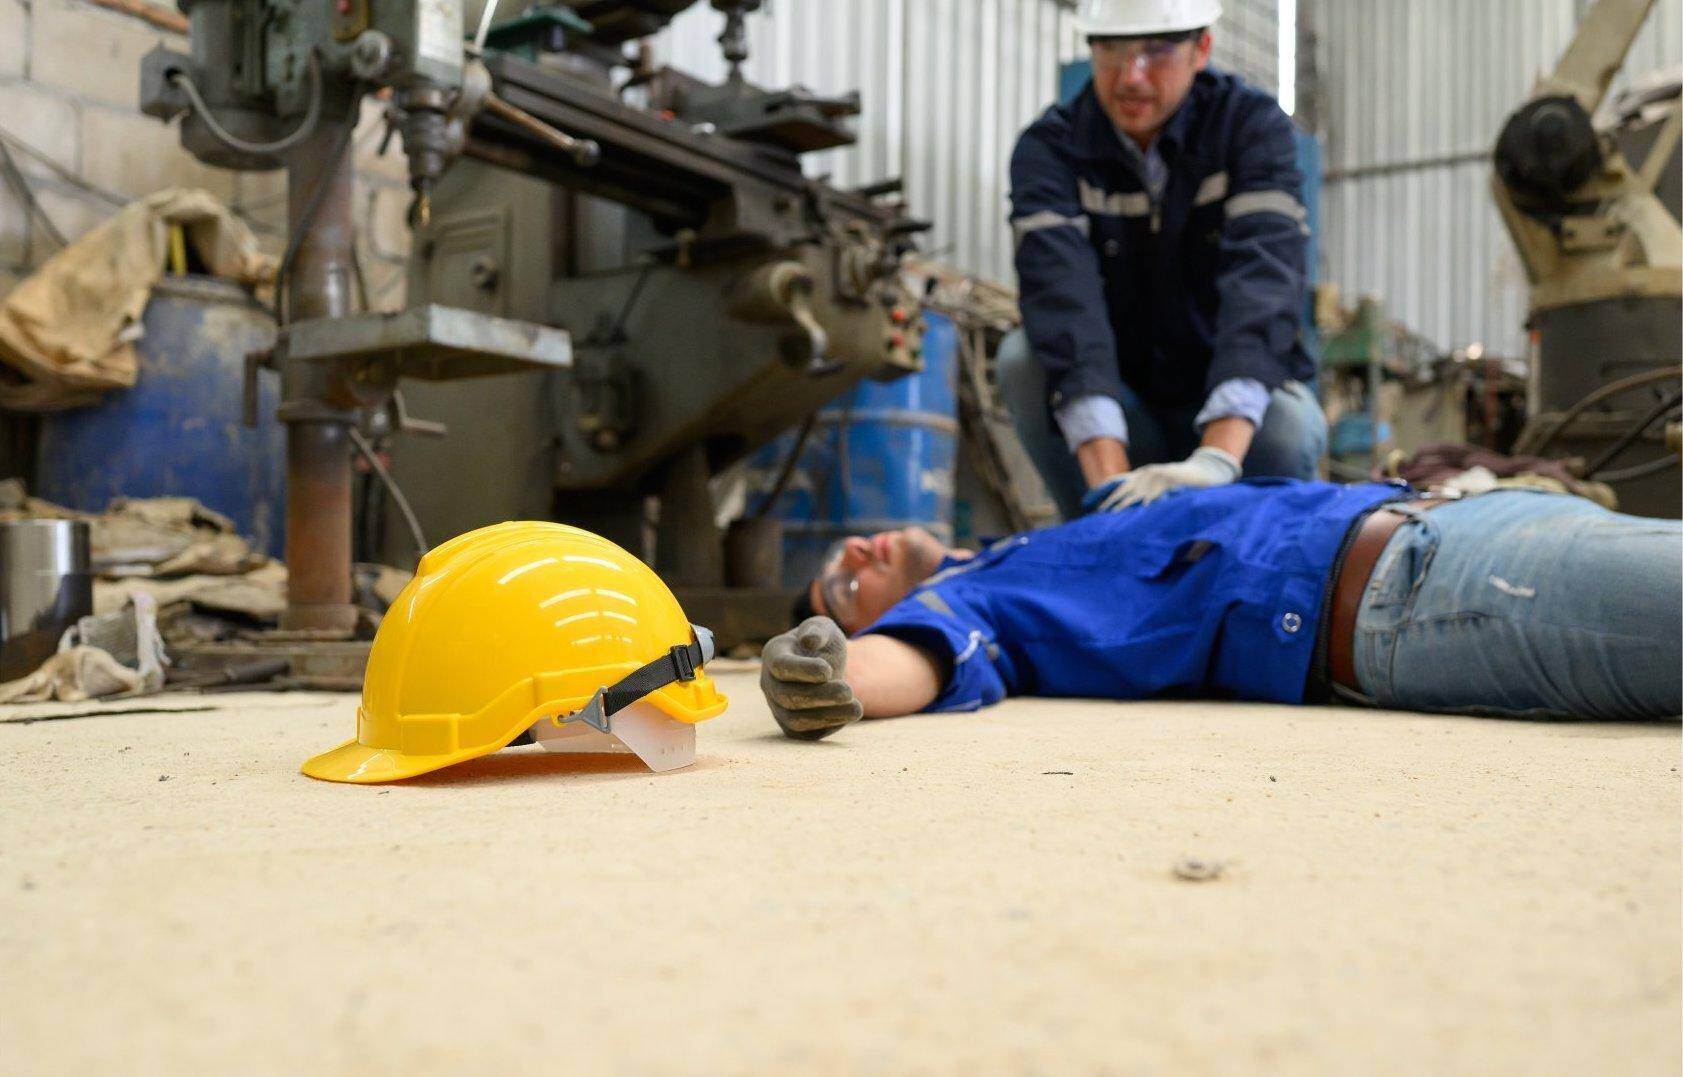 An unconscious man who has been injured on the job who will file for workers compensation in Brookhaven, Georgia